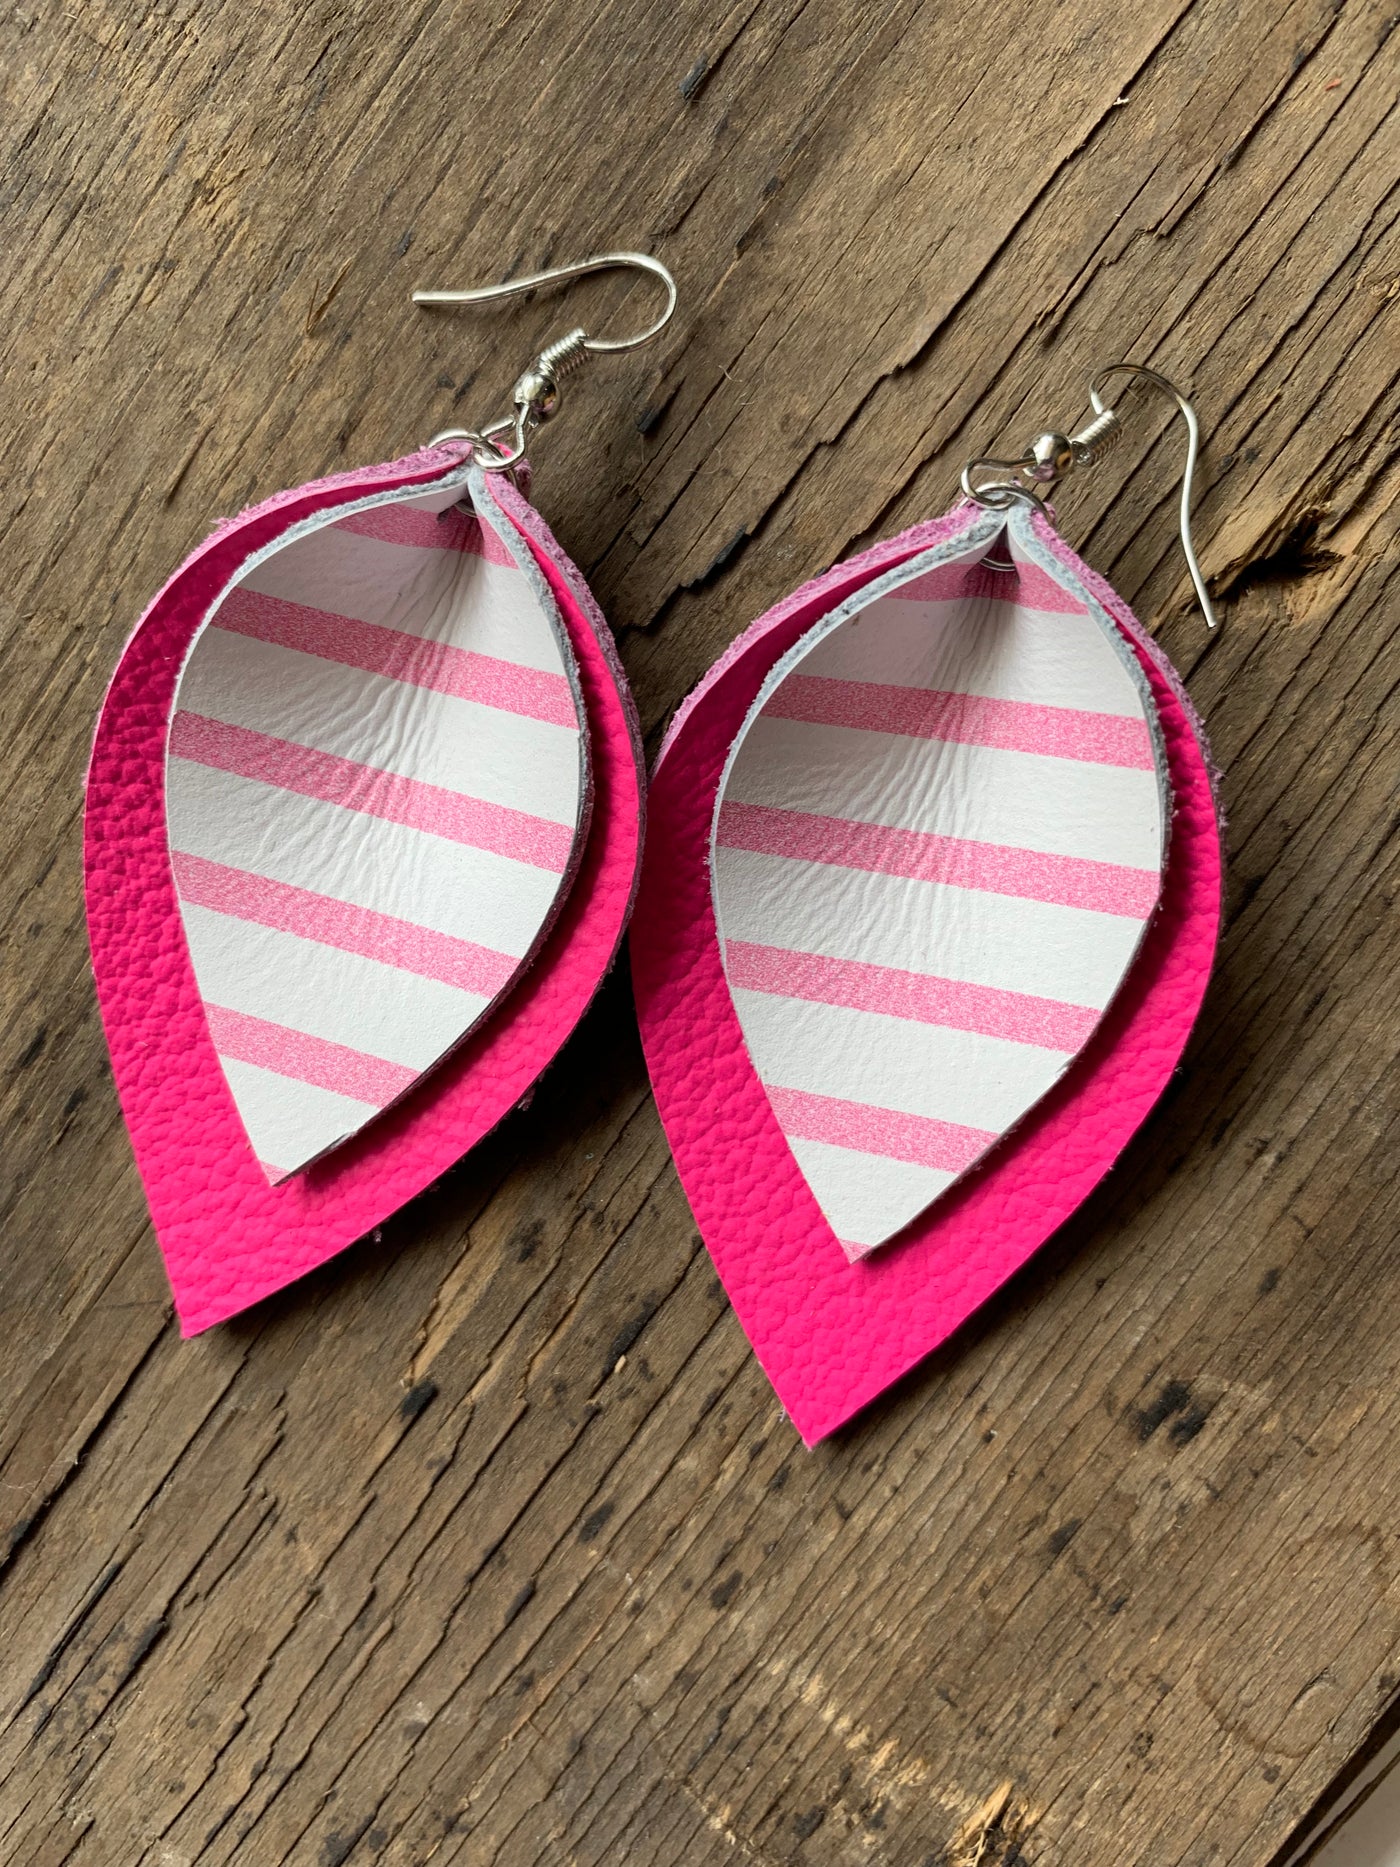 Hot Pink Leather earrings with white stripe - Jill's Jewels | Unique, Handcrafted, Trendy, And Fun Jewelry